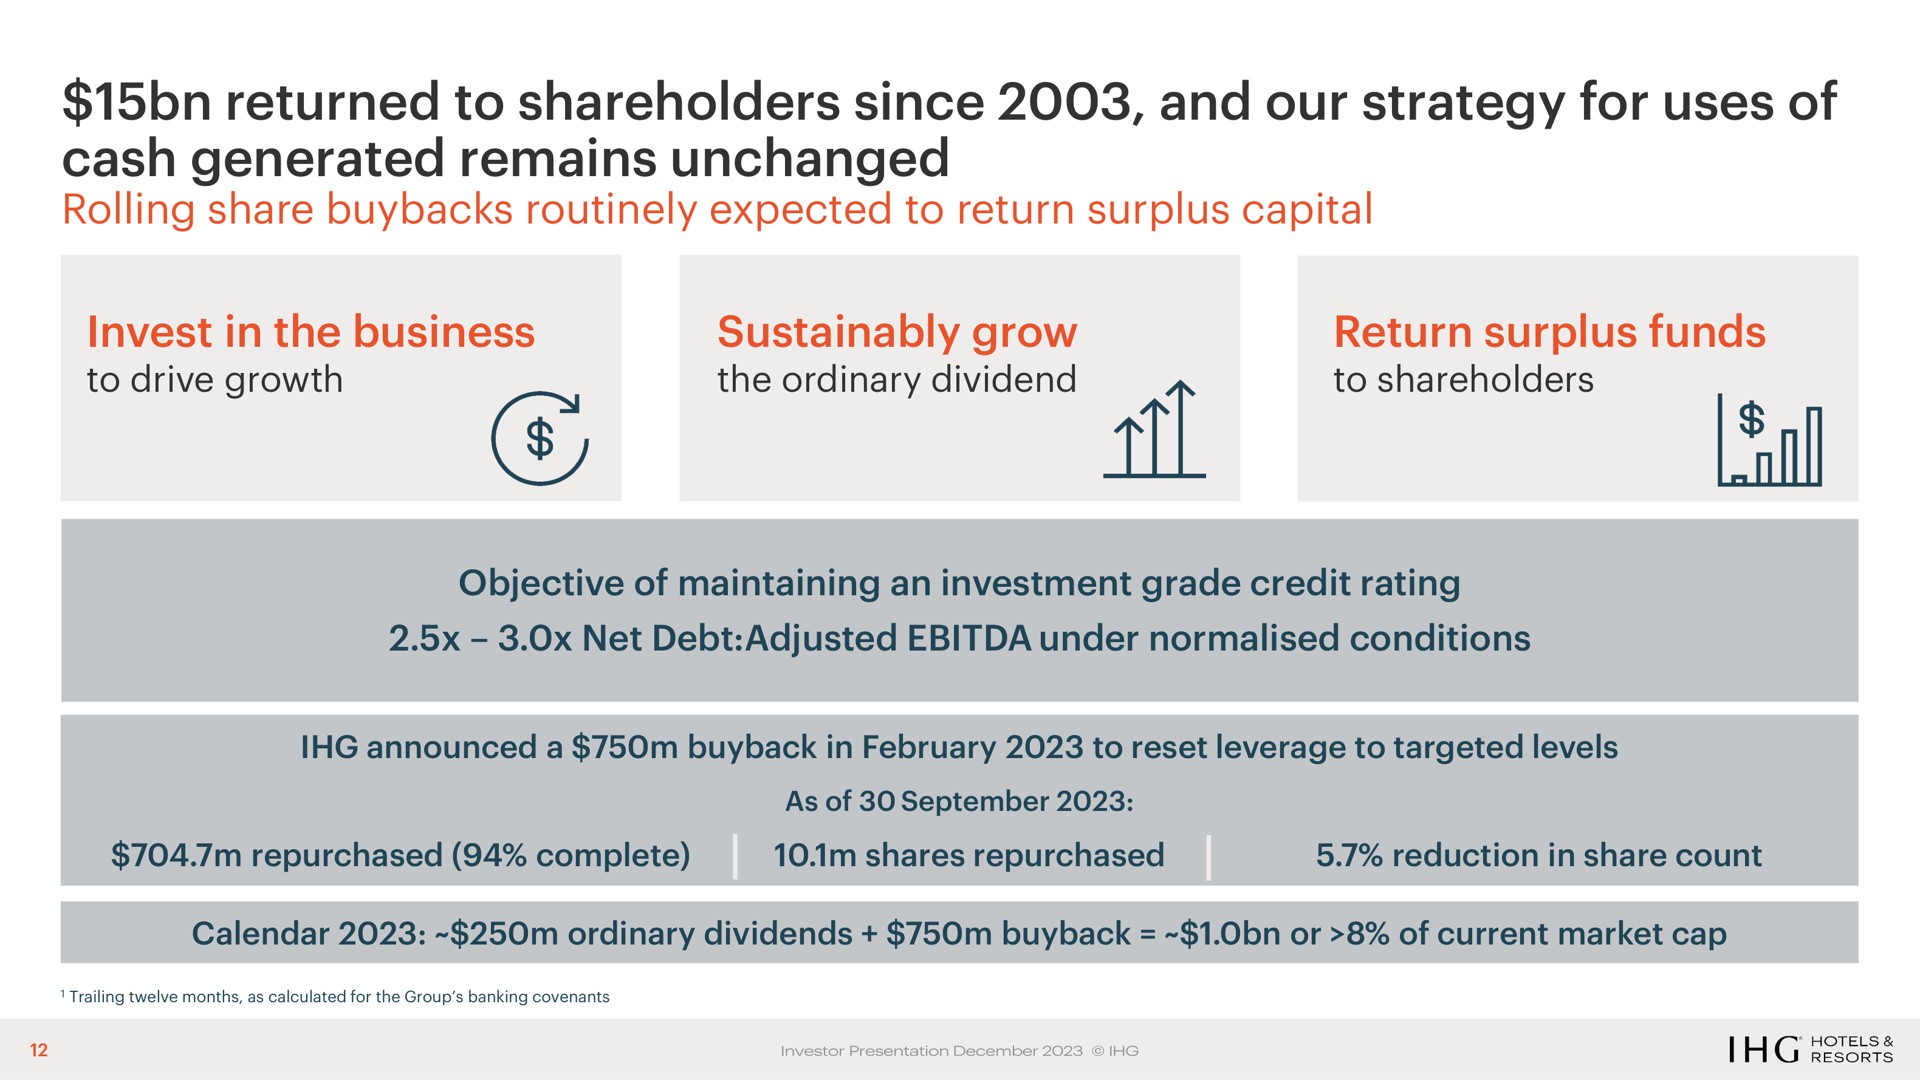 returned to shareholders since and our strategy for uses of cash generated remains unchanged invest in the business grow return surplus funds | IHG Hotels